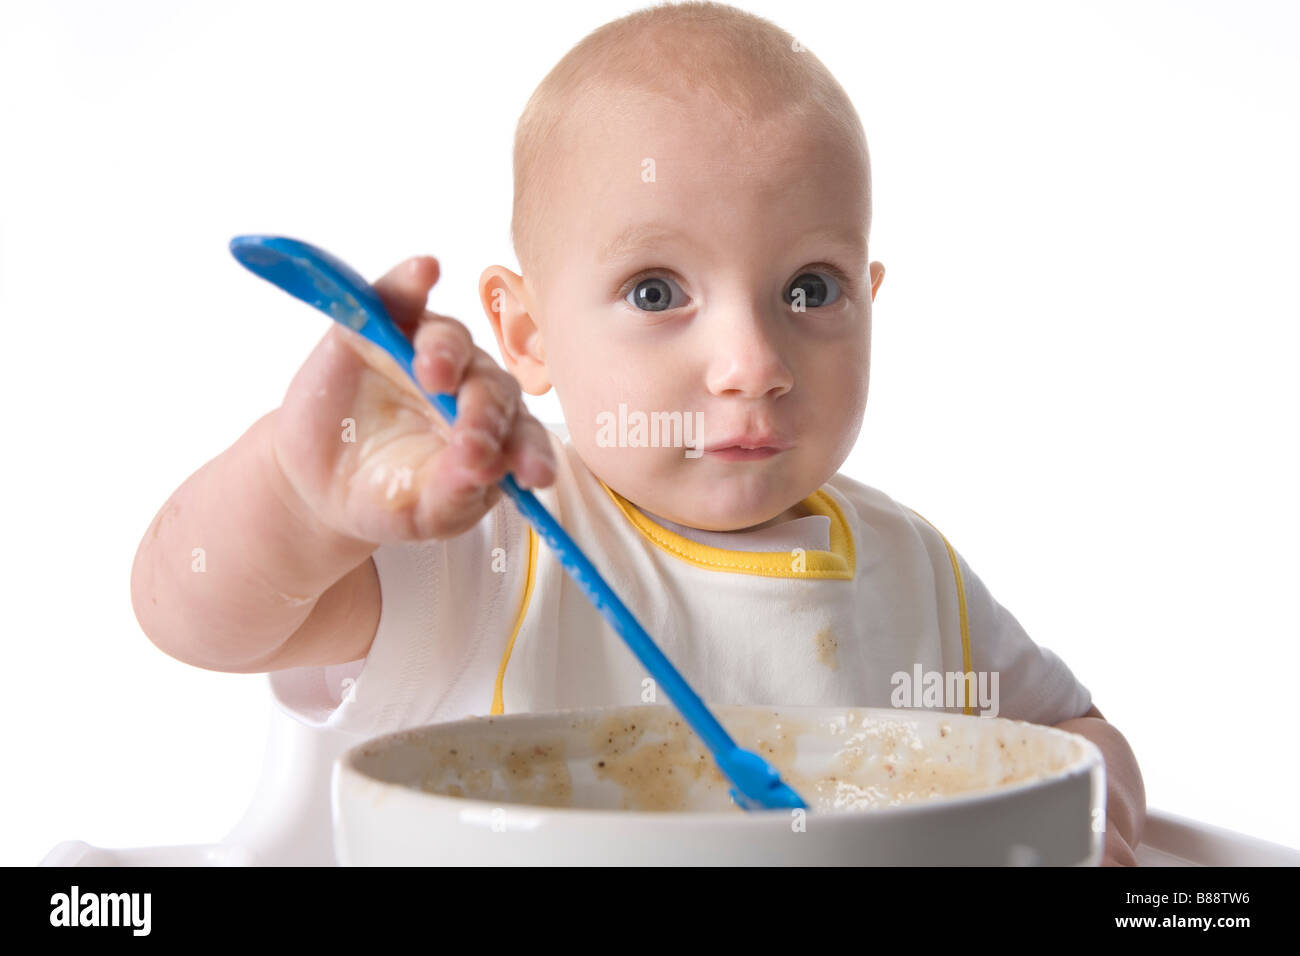 Toddler girl eating by herself Stock Photo